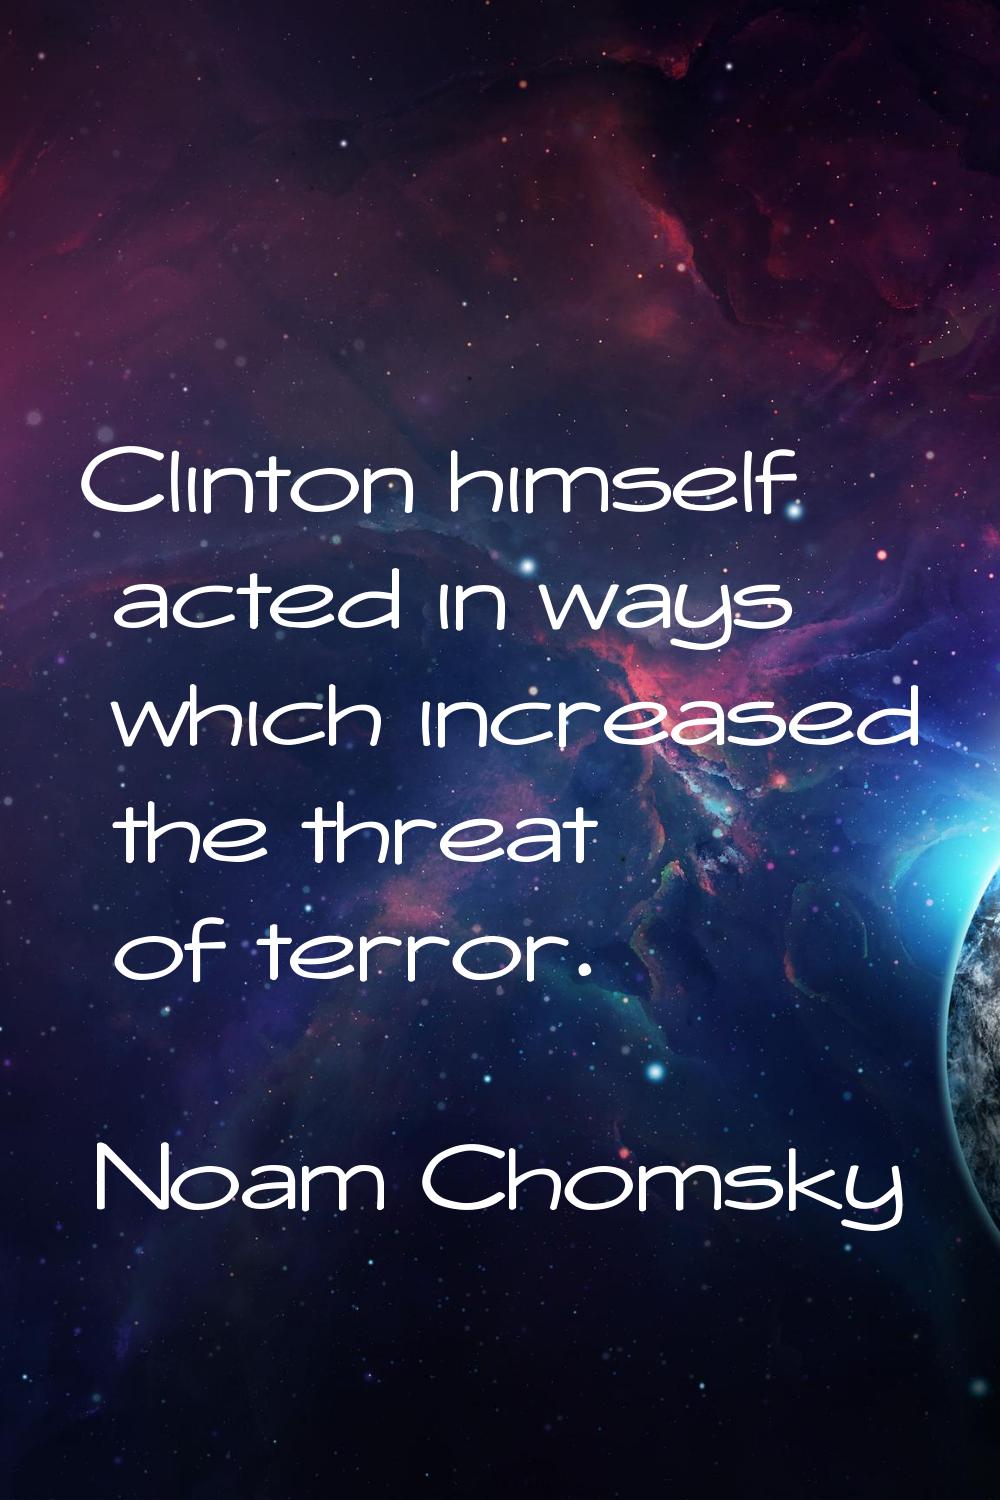 Clinton himself acted in ways which increased the threat of terror.